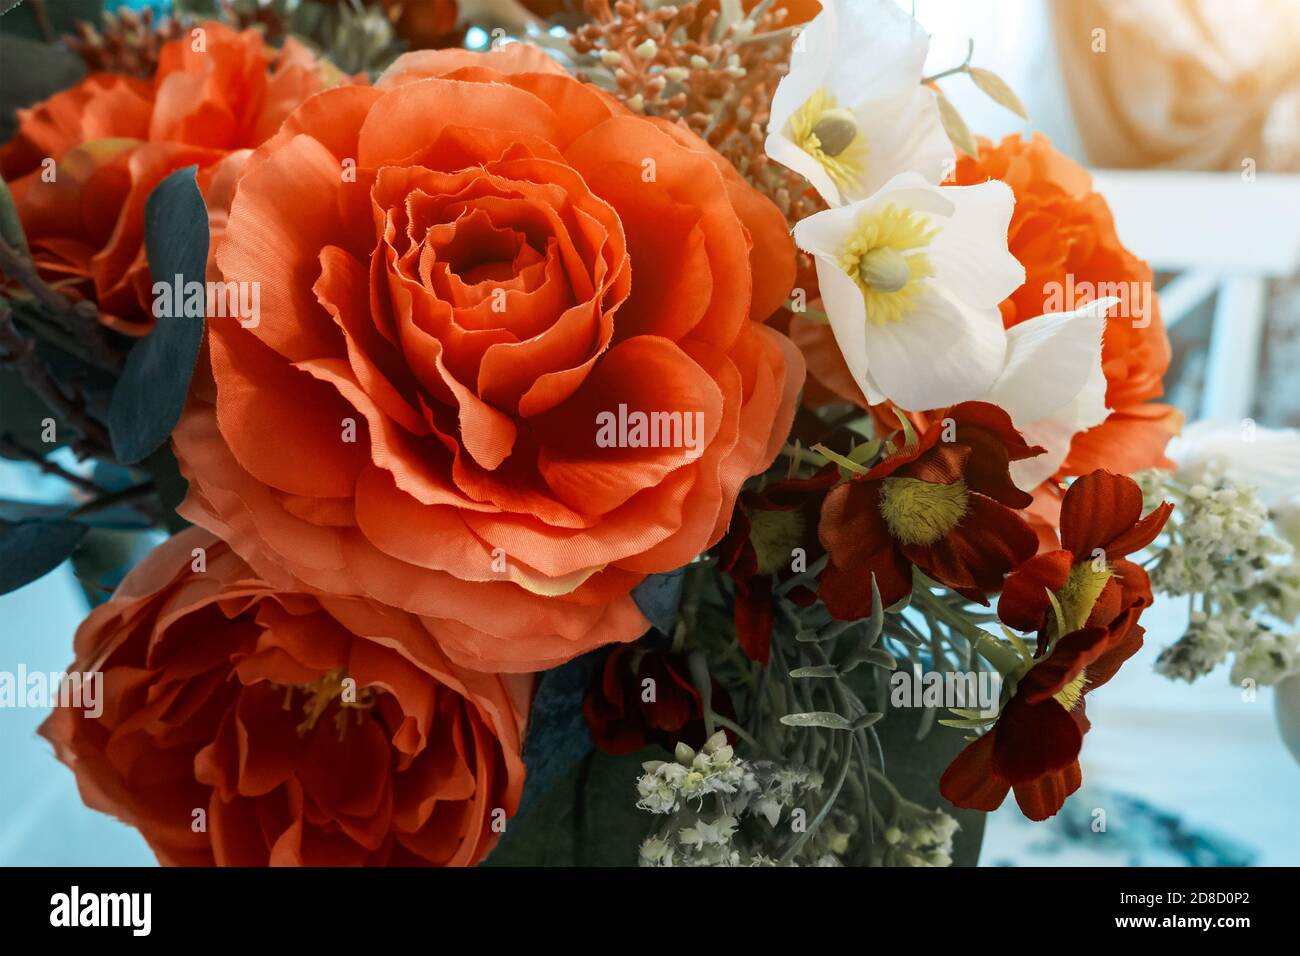 colorful bouquet of artificial flowers made of fabric, fake red roses Stock Photo